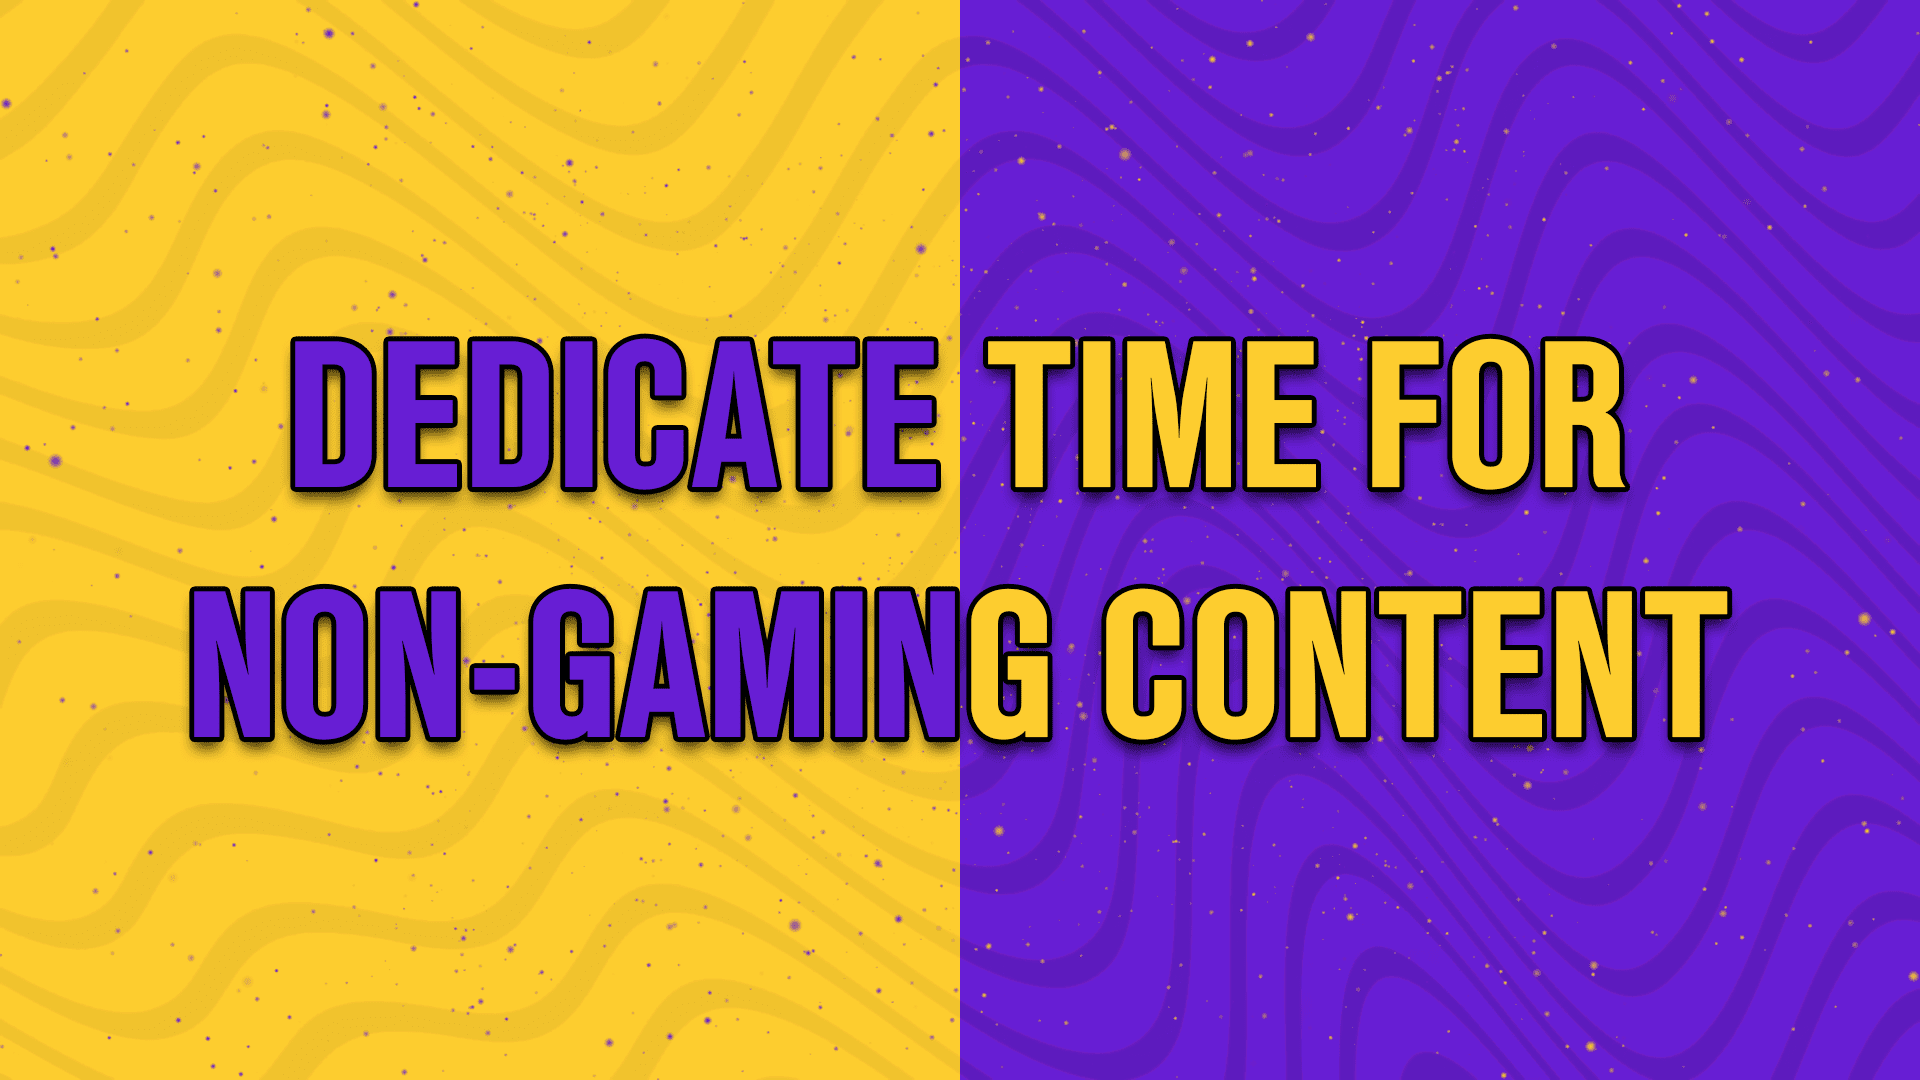 Dedicate time for non gaming content - StreamBee